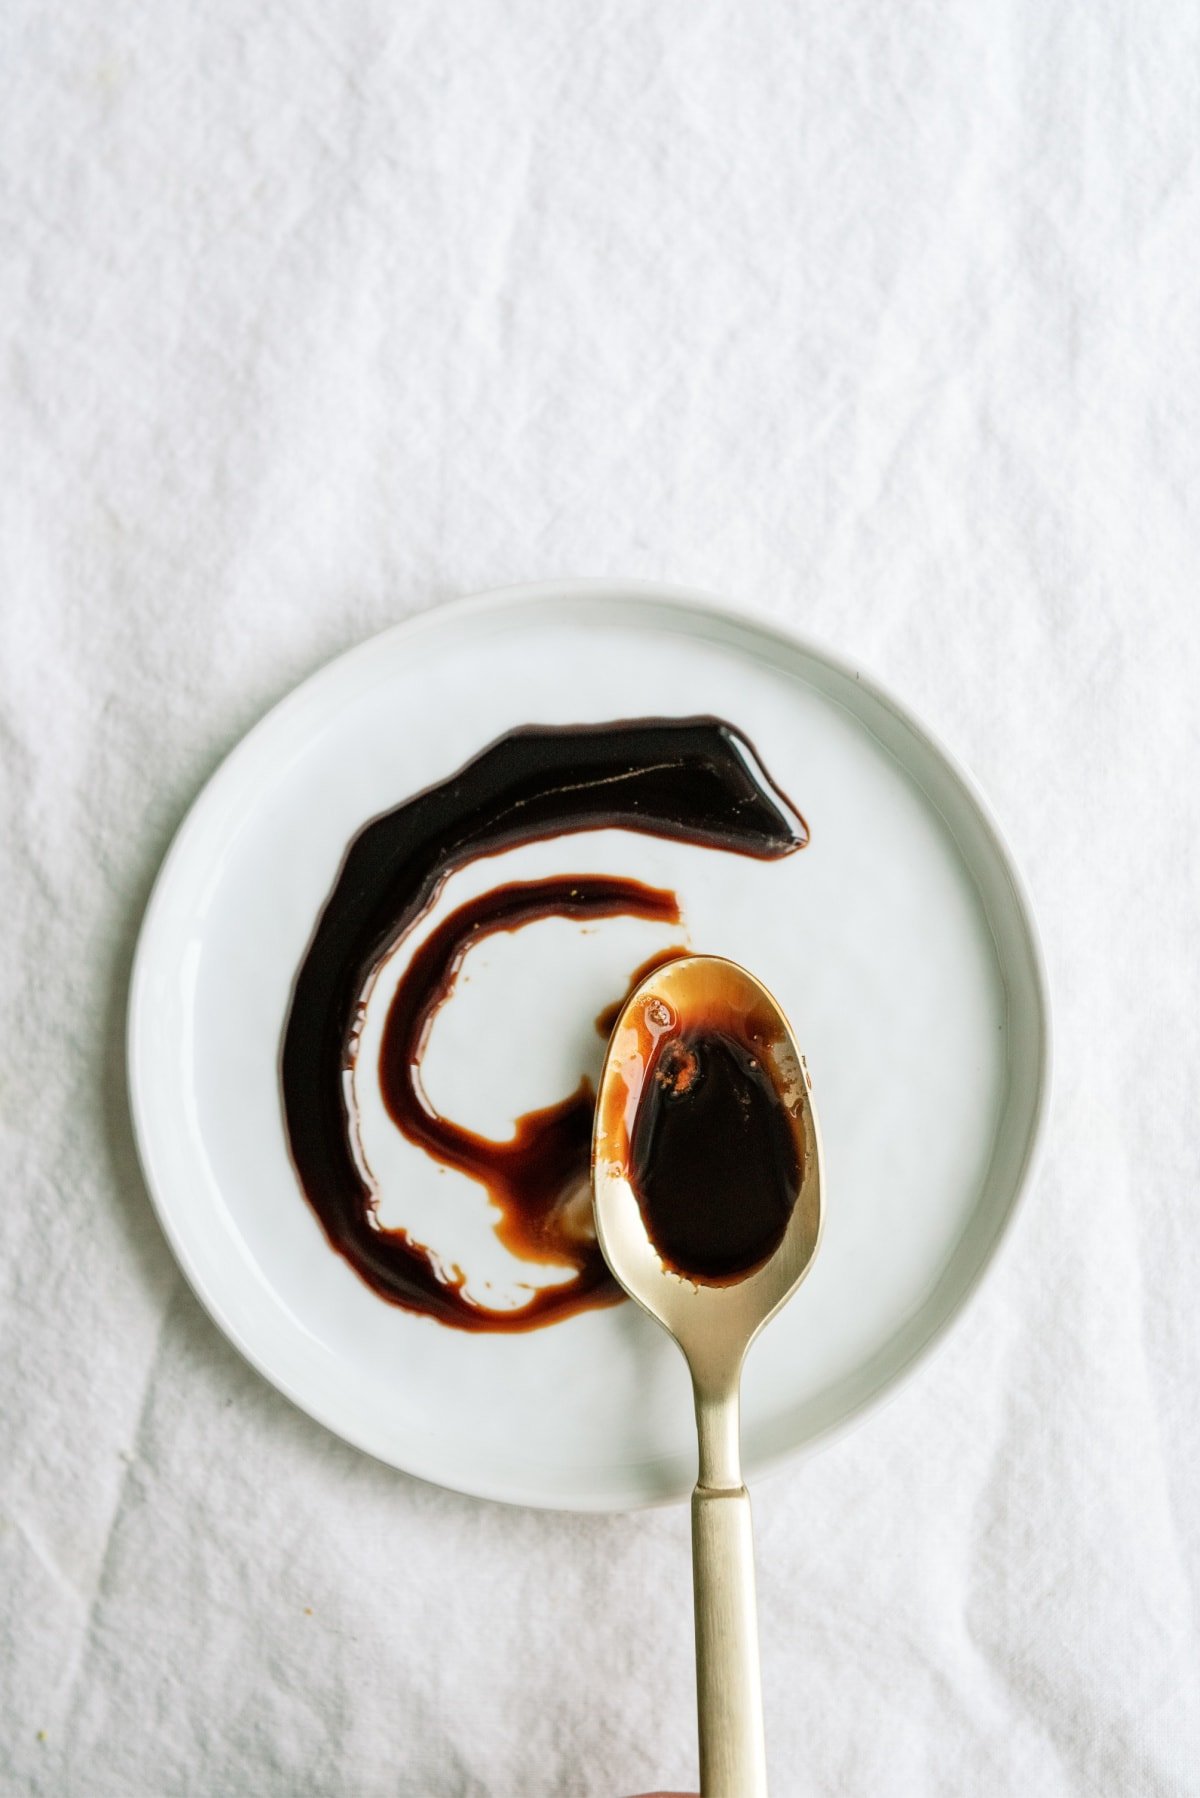 Swirling balsamic reduction onto plate with spoon